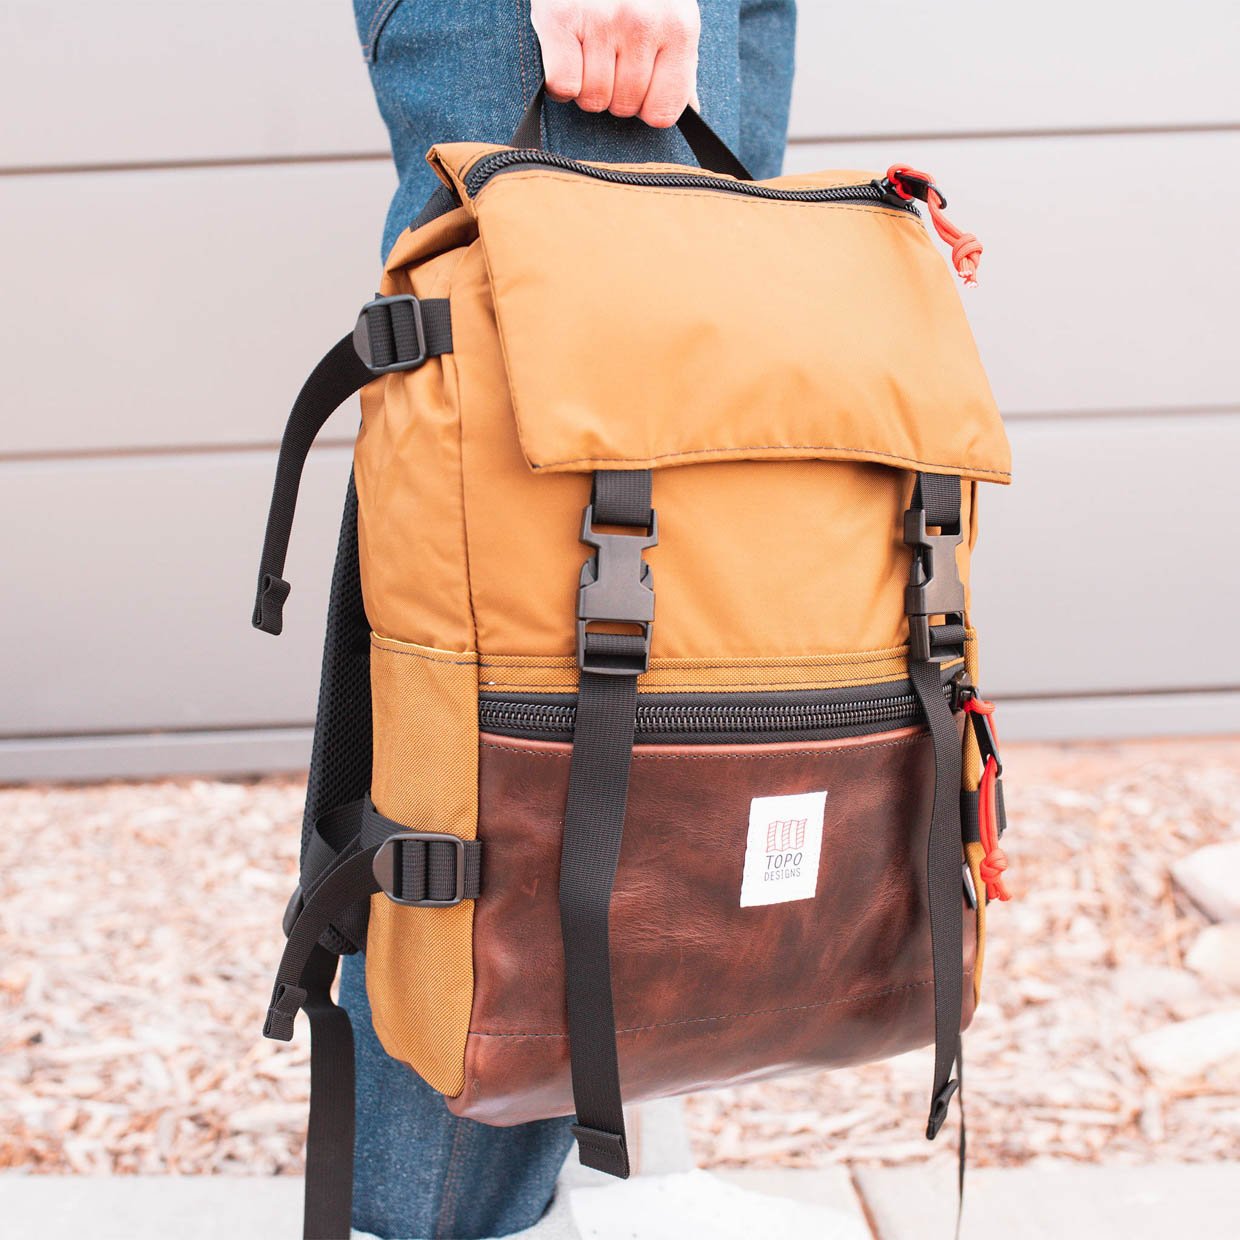 Topo Designs Rover Leather Backpack